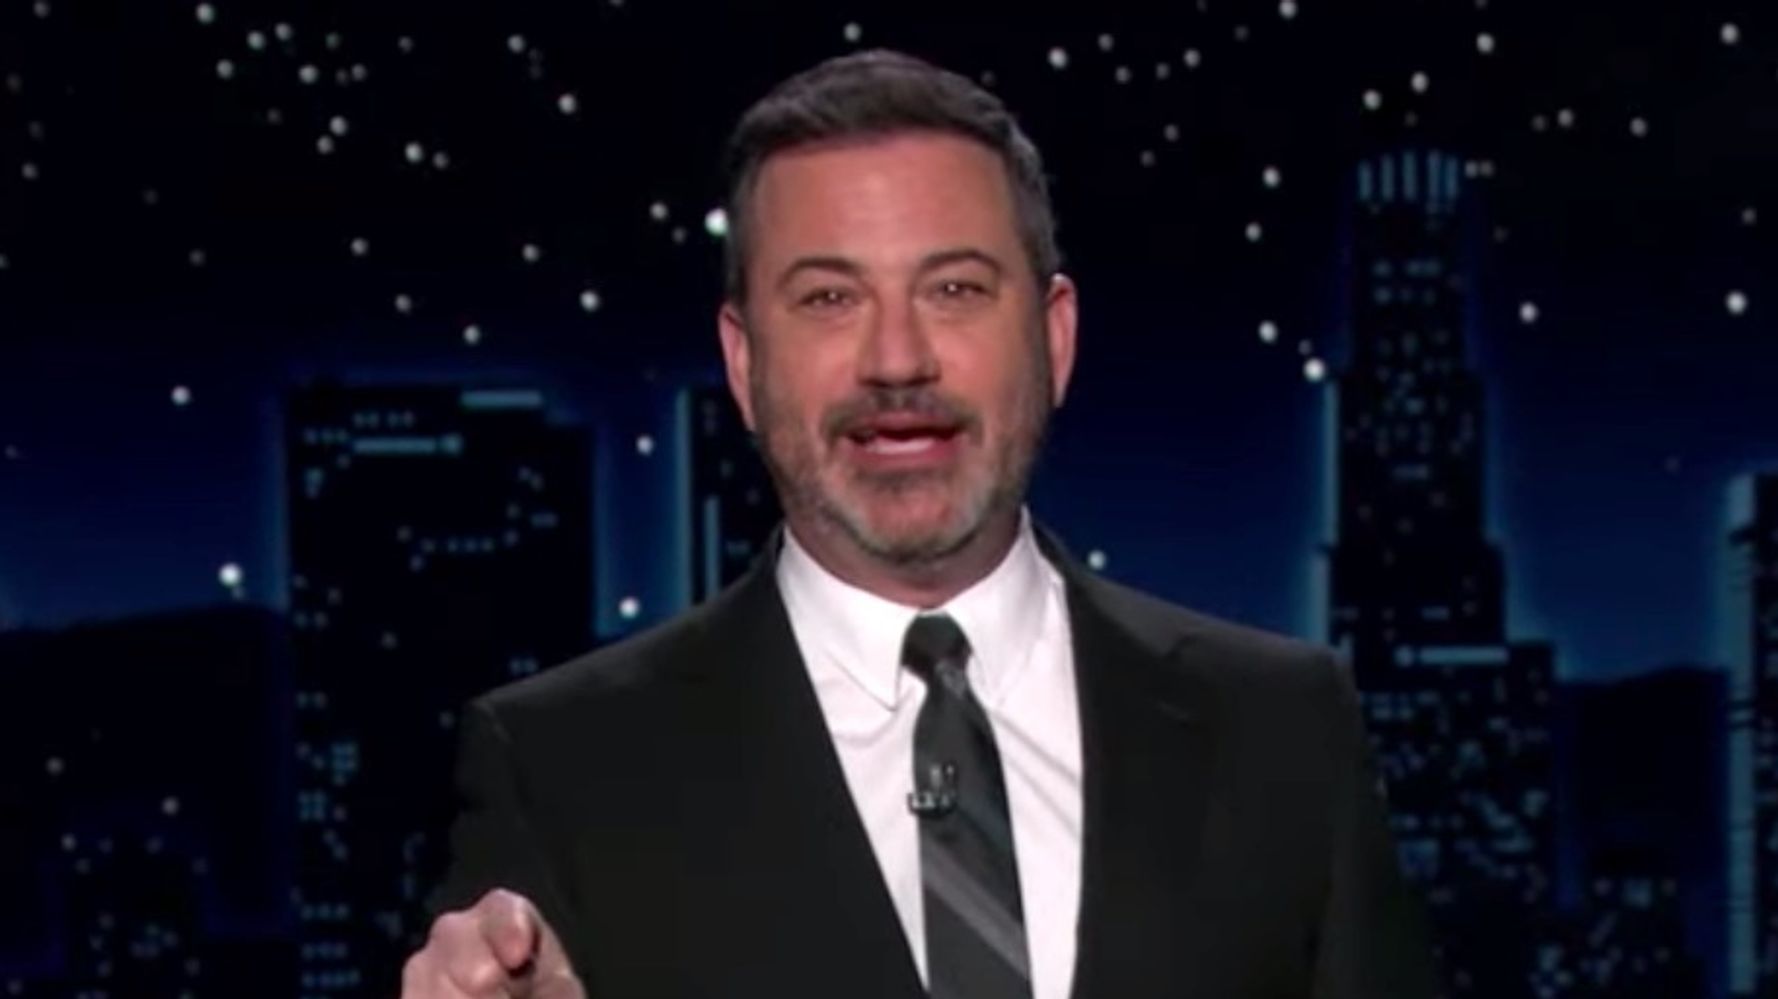 Jimmy Kimmel nominates and shames the state that wasted $ 2 million to suck up Trump